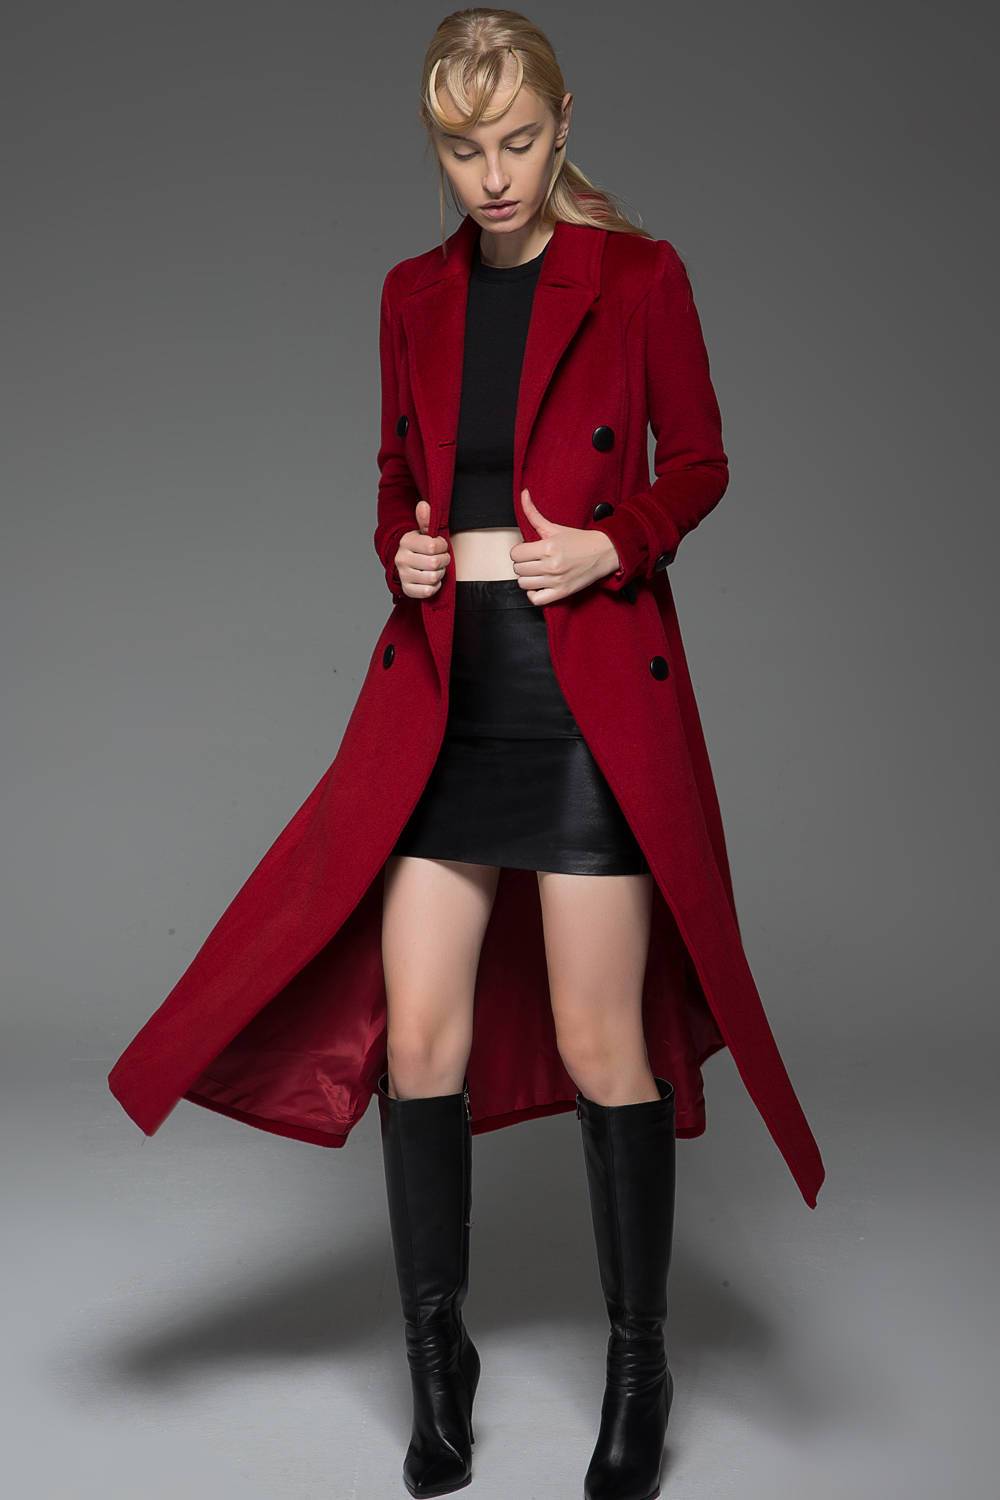 Classic Red Coat - Wool Long Full Length Fitted Slim Tailored Double-Breasted Woman's Coat with Black Buttons & Double Lapels C741